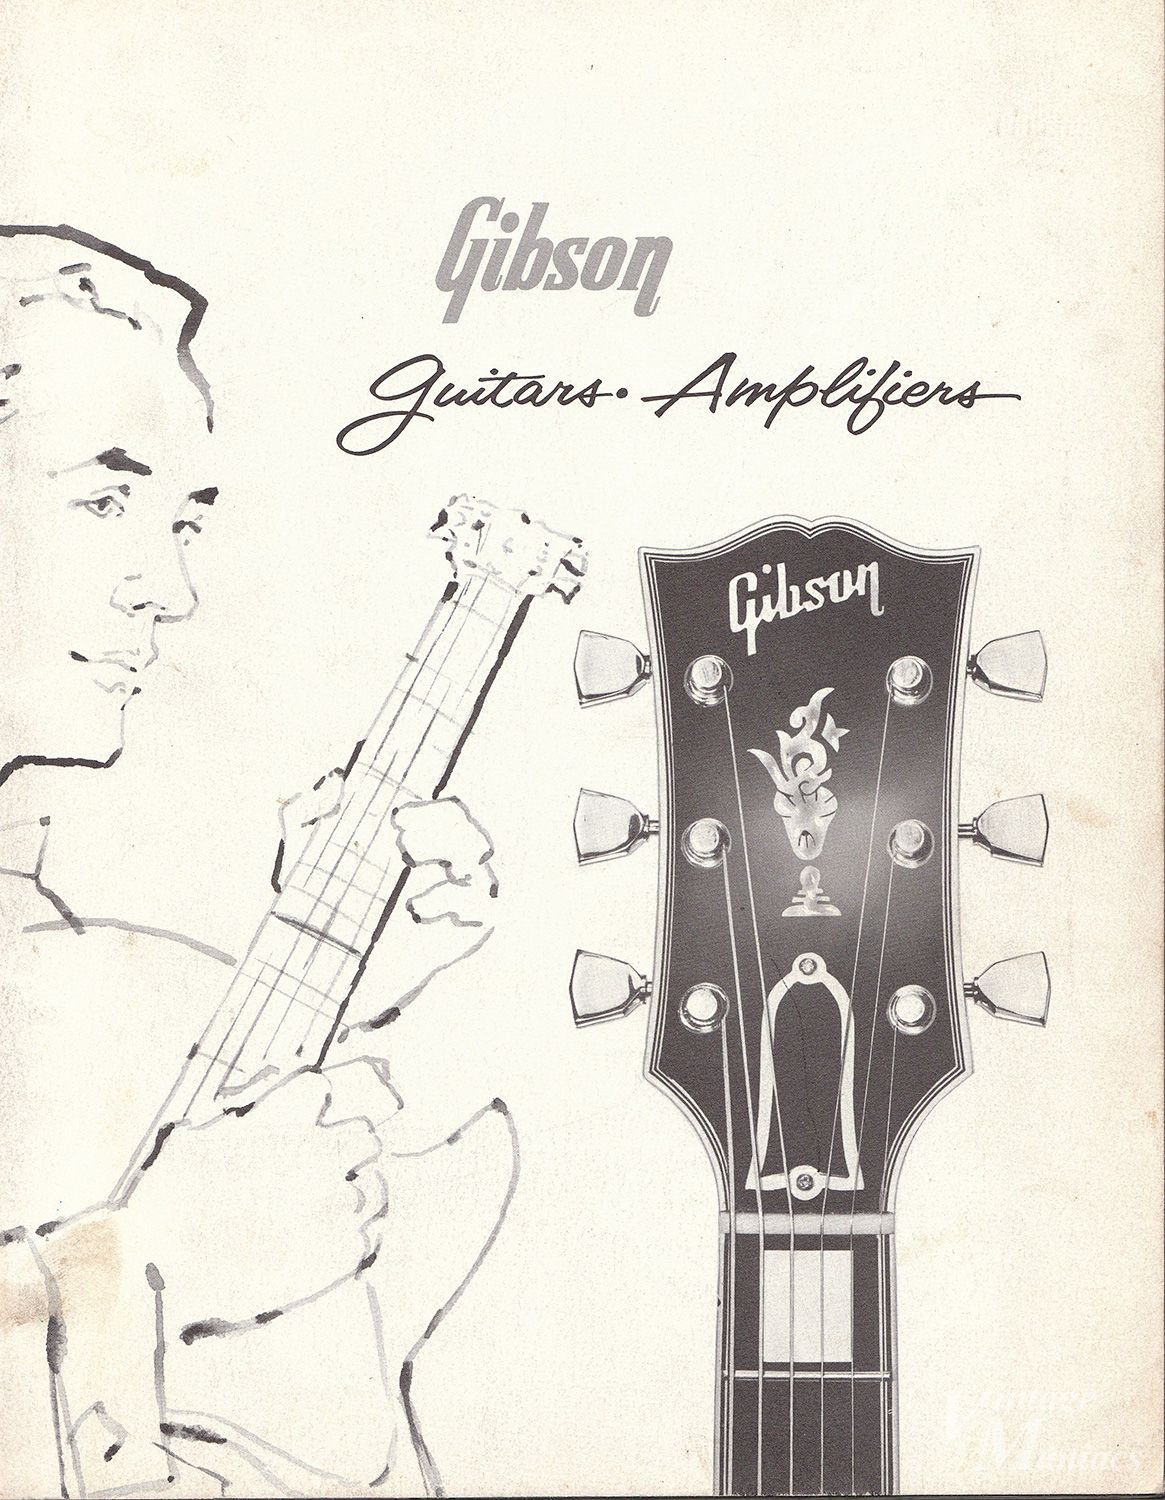 Gibson Guitars Amplifiers1959年ヴィンテージカタログ - その他